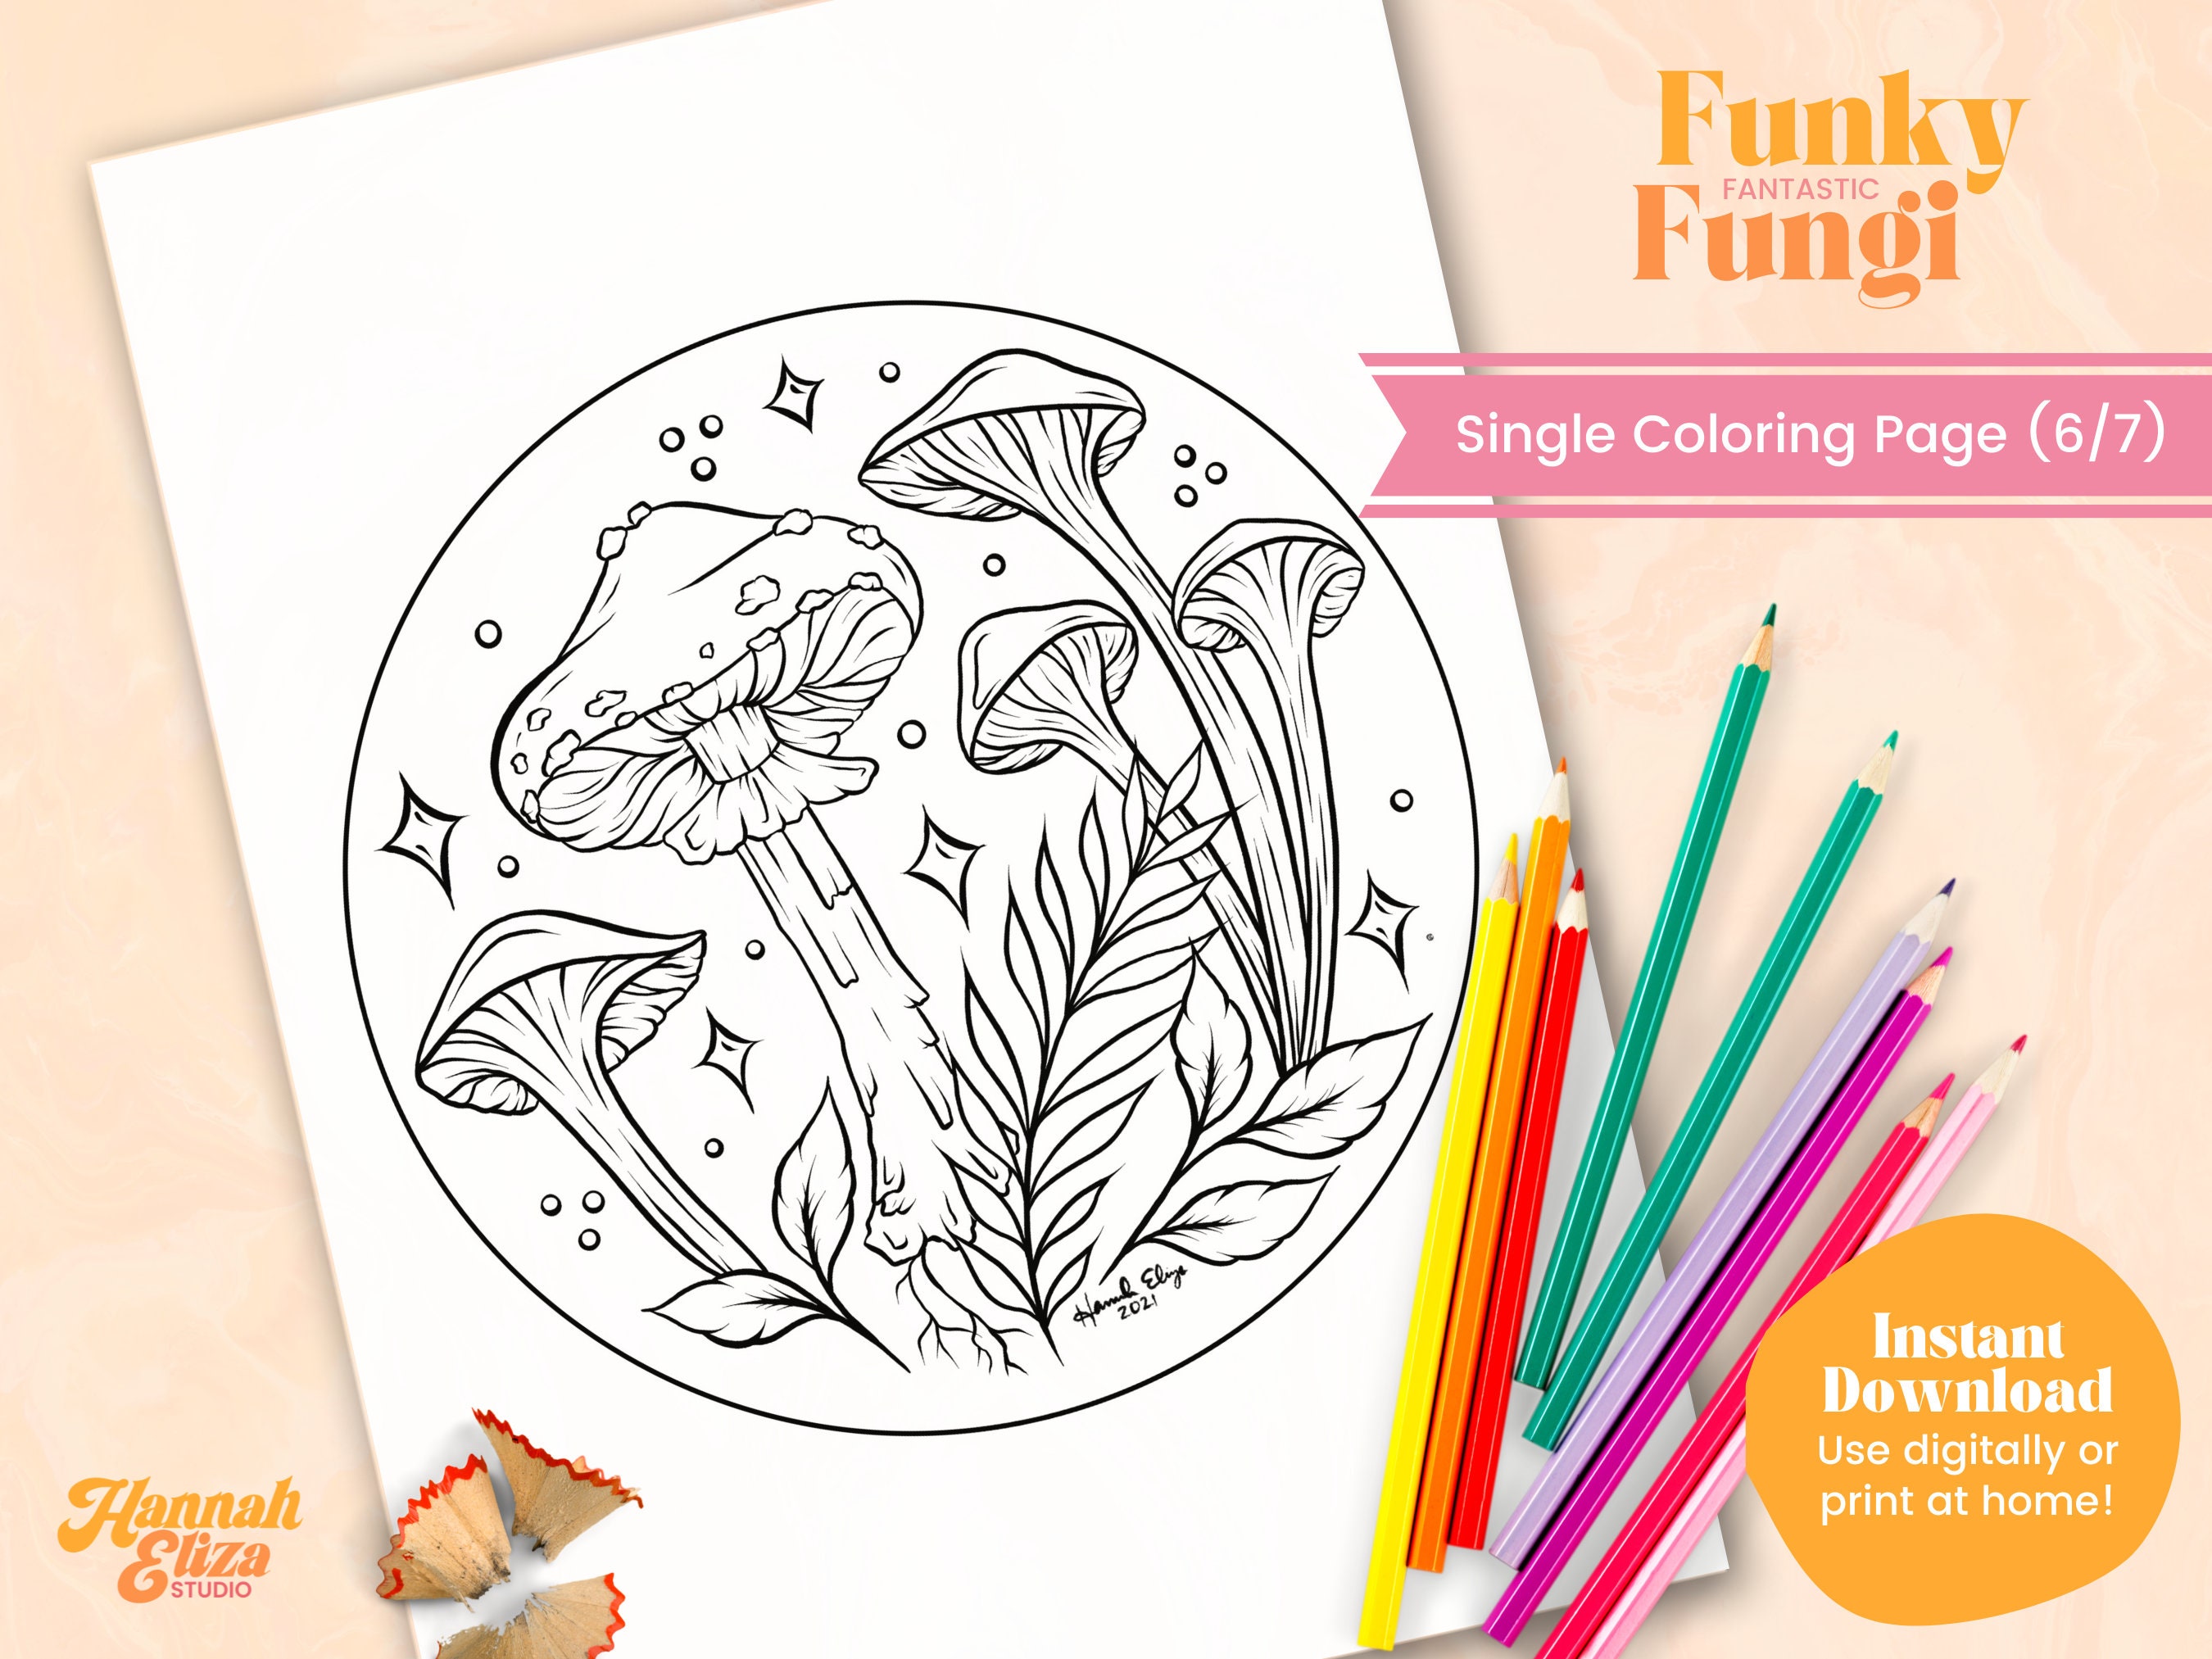 Coloring Bookmarks, Flower Adult Coloring Page PDF, Garden, Mushrooms,  Cottagecore, Therapeutic Self Care Activity, Printable Birthday Gift 